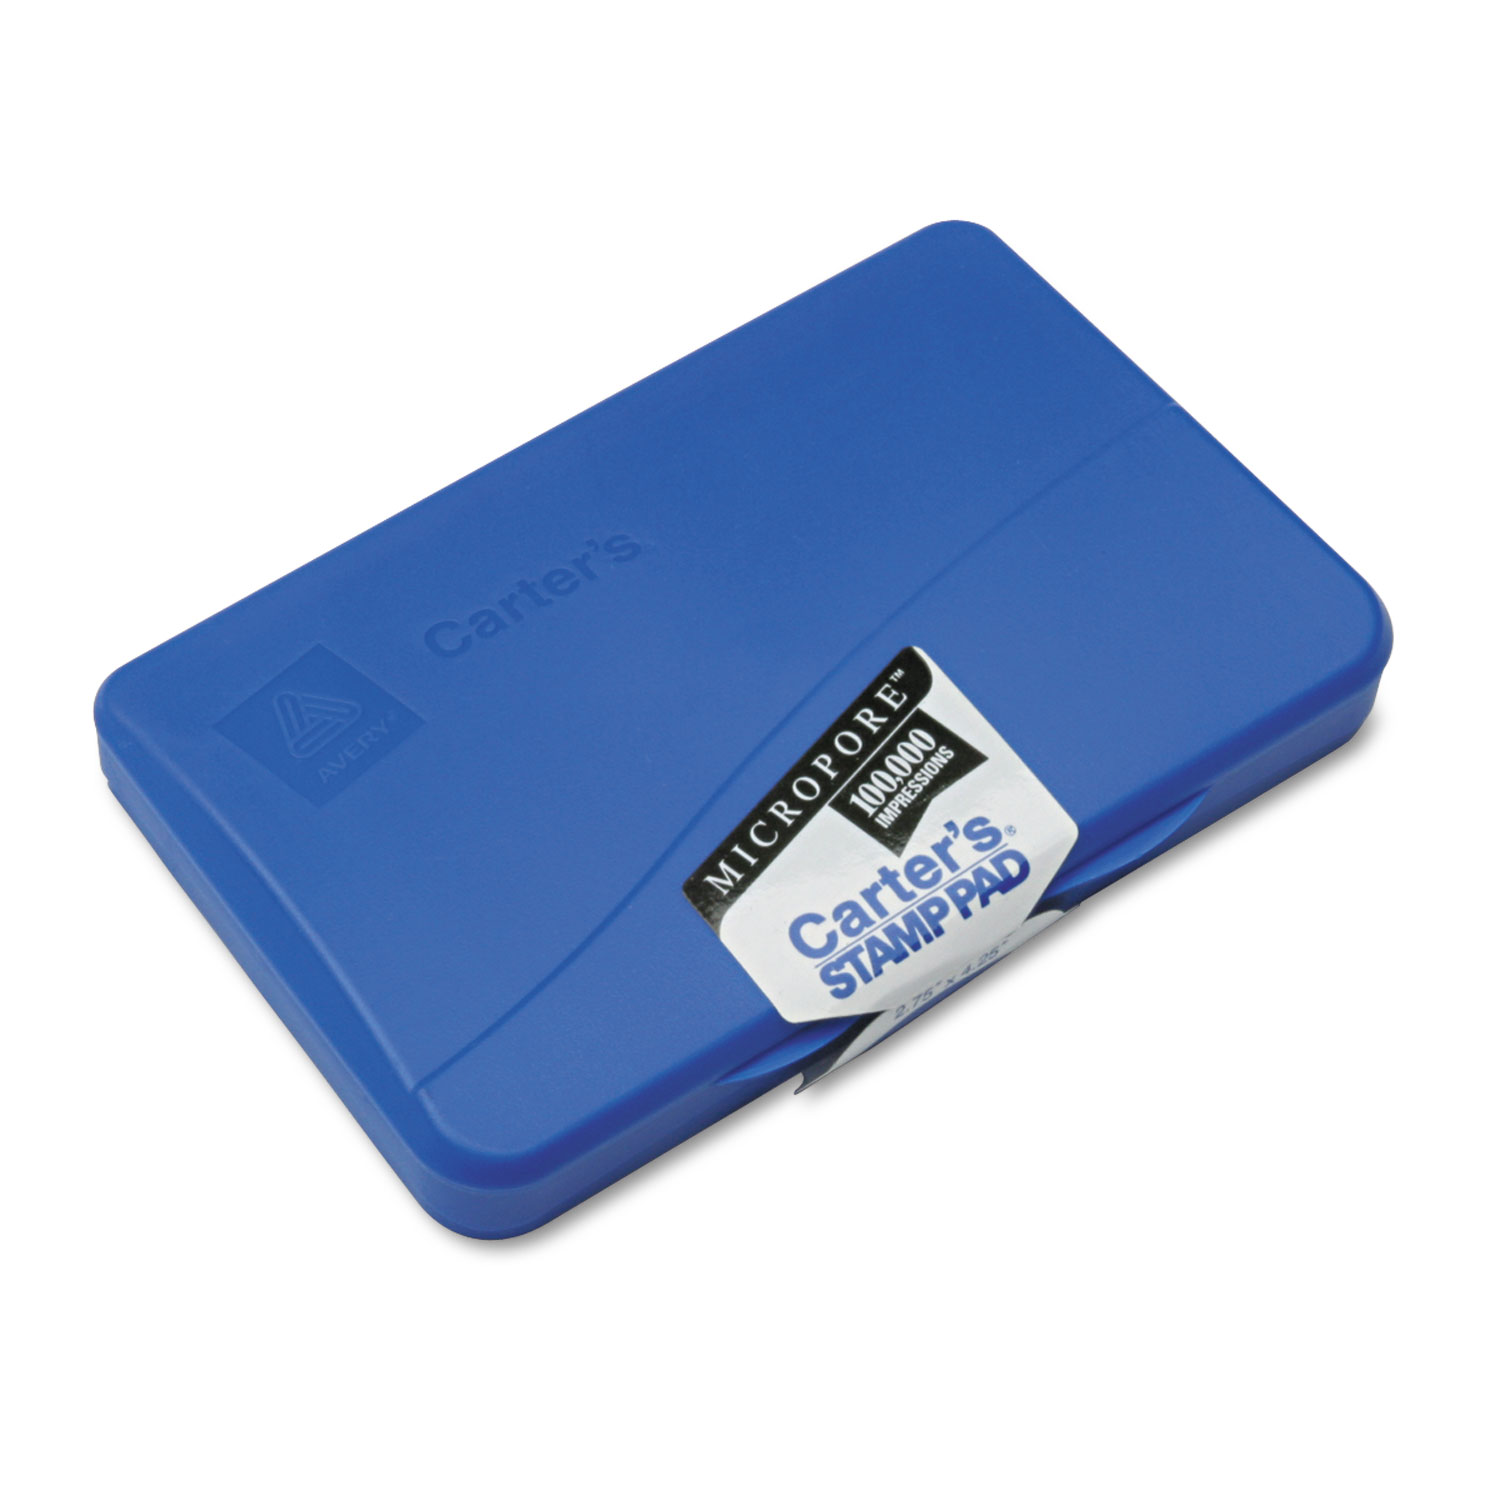  Carter's 21261 Micropore Stamp Pad, 4 1/4 x 2 3/4, Blue (AVE21261) 